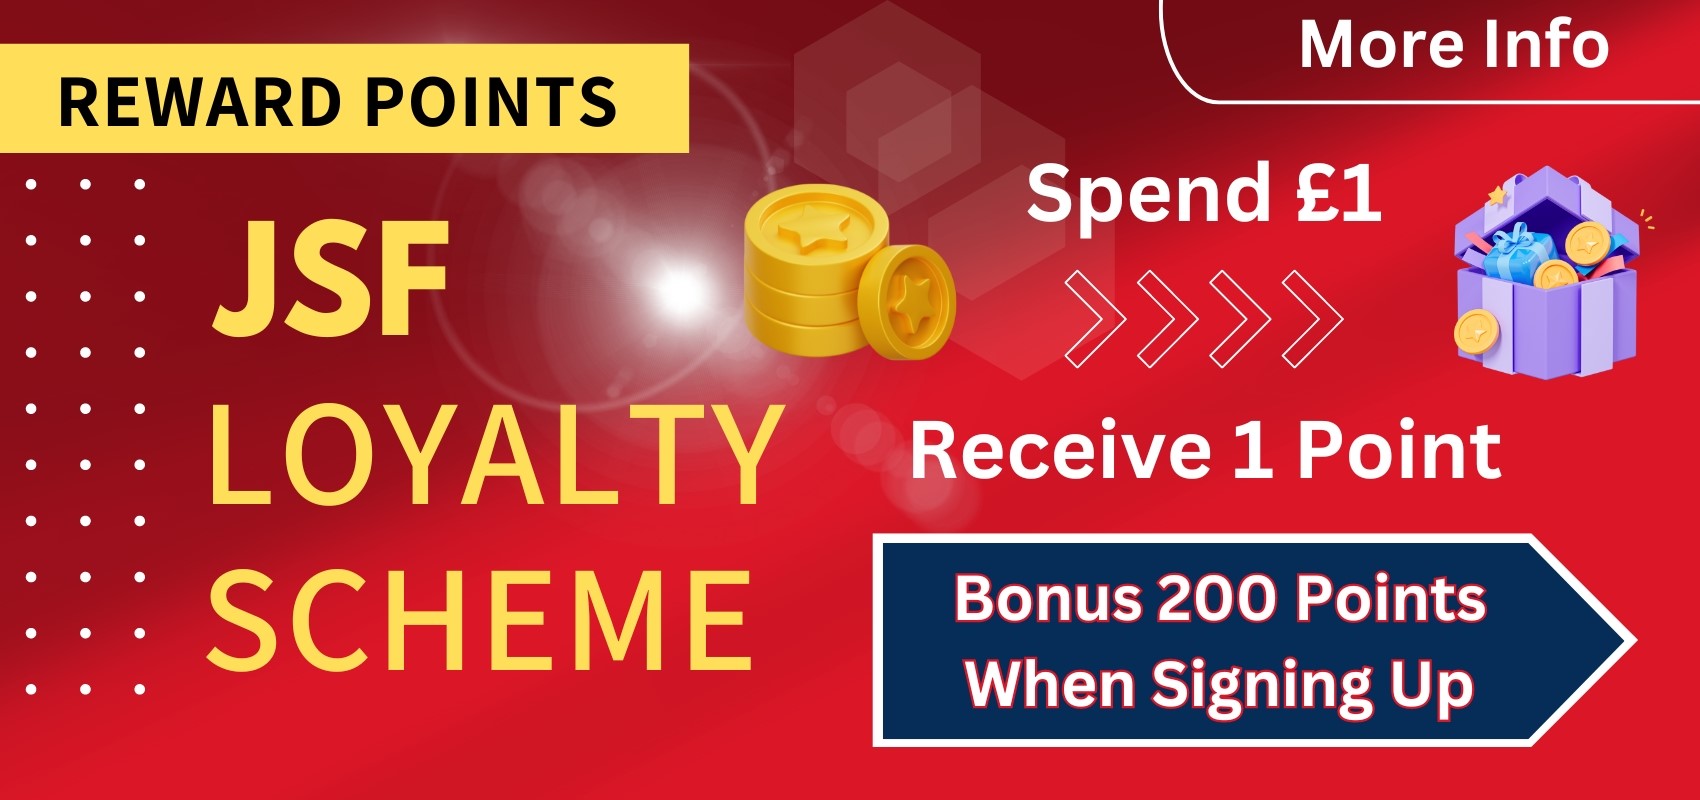 JSF rewards points, sign up and receive 200 points. £1 spent earns 1 point